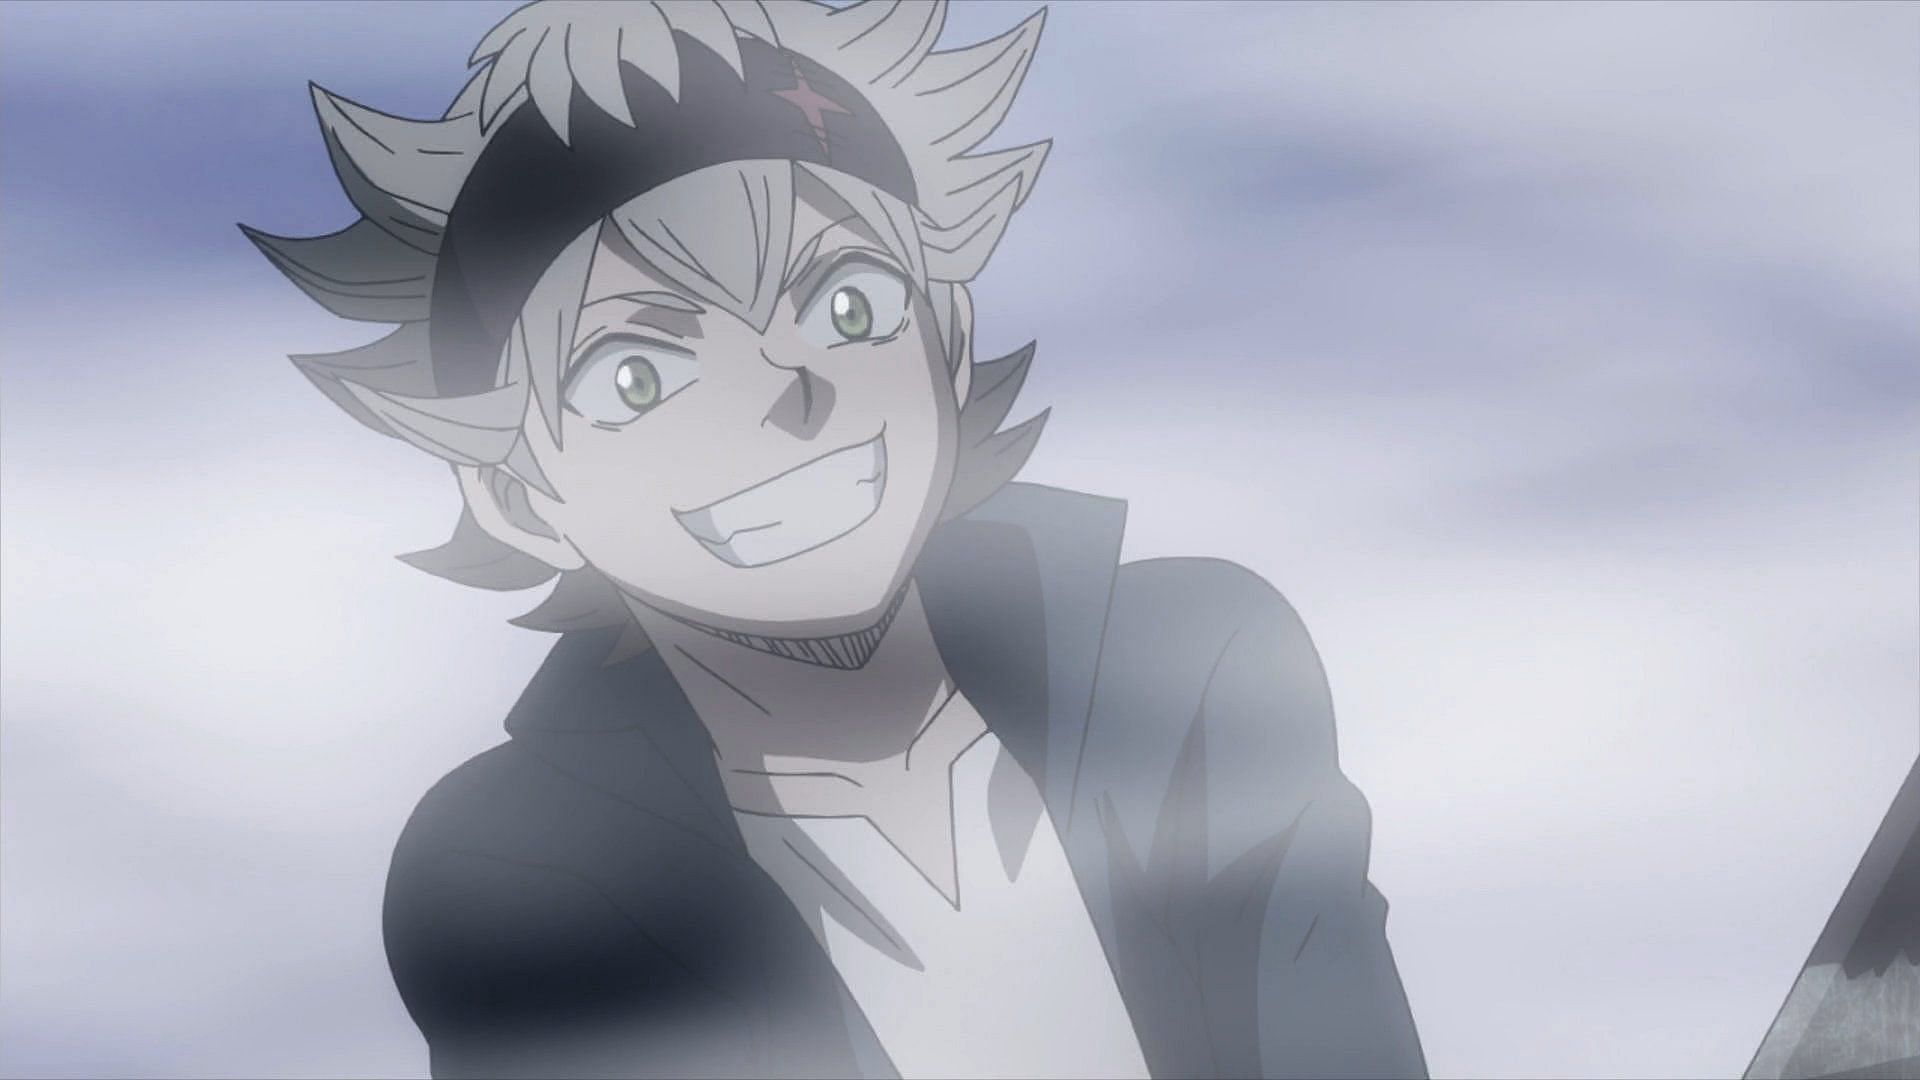 Asta as seen in the series